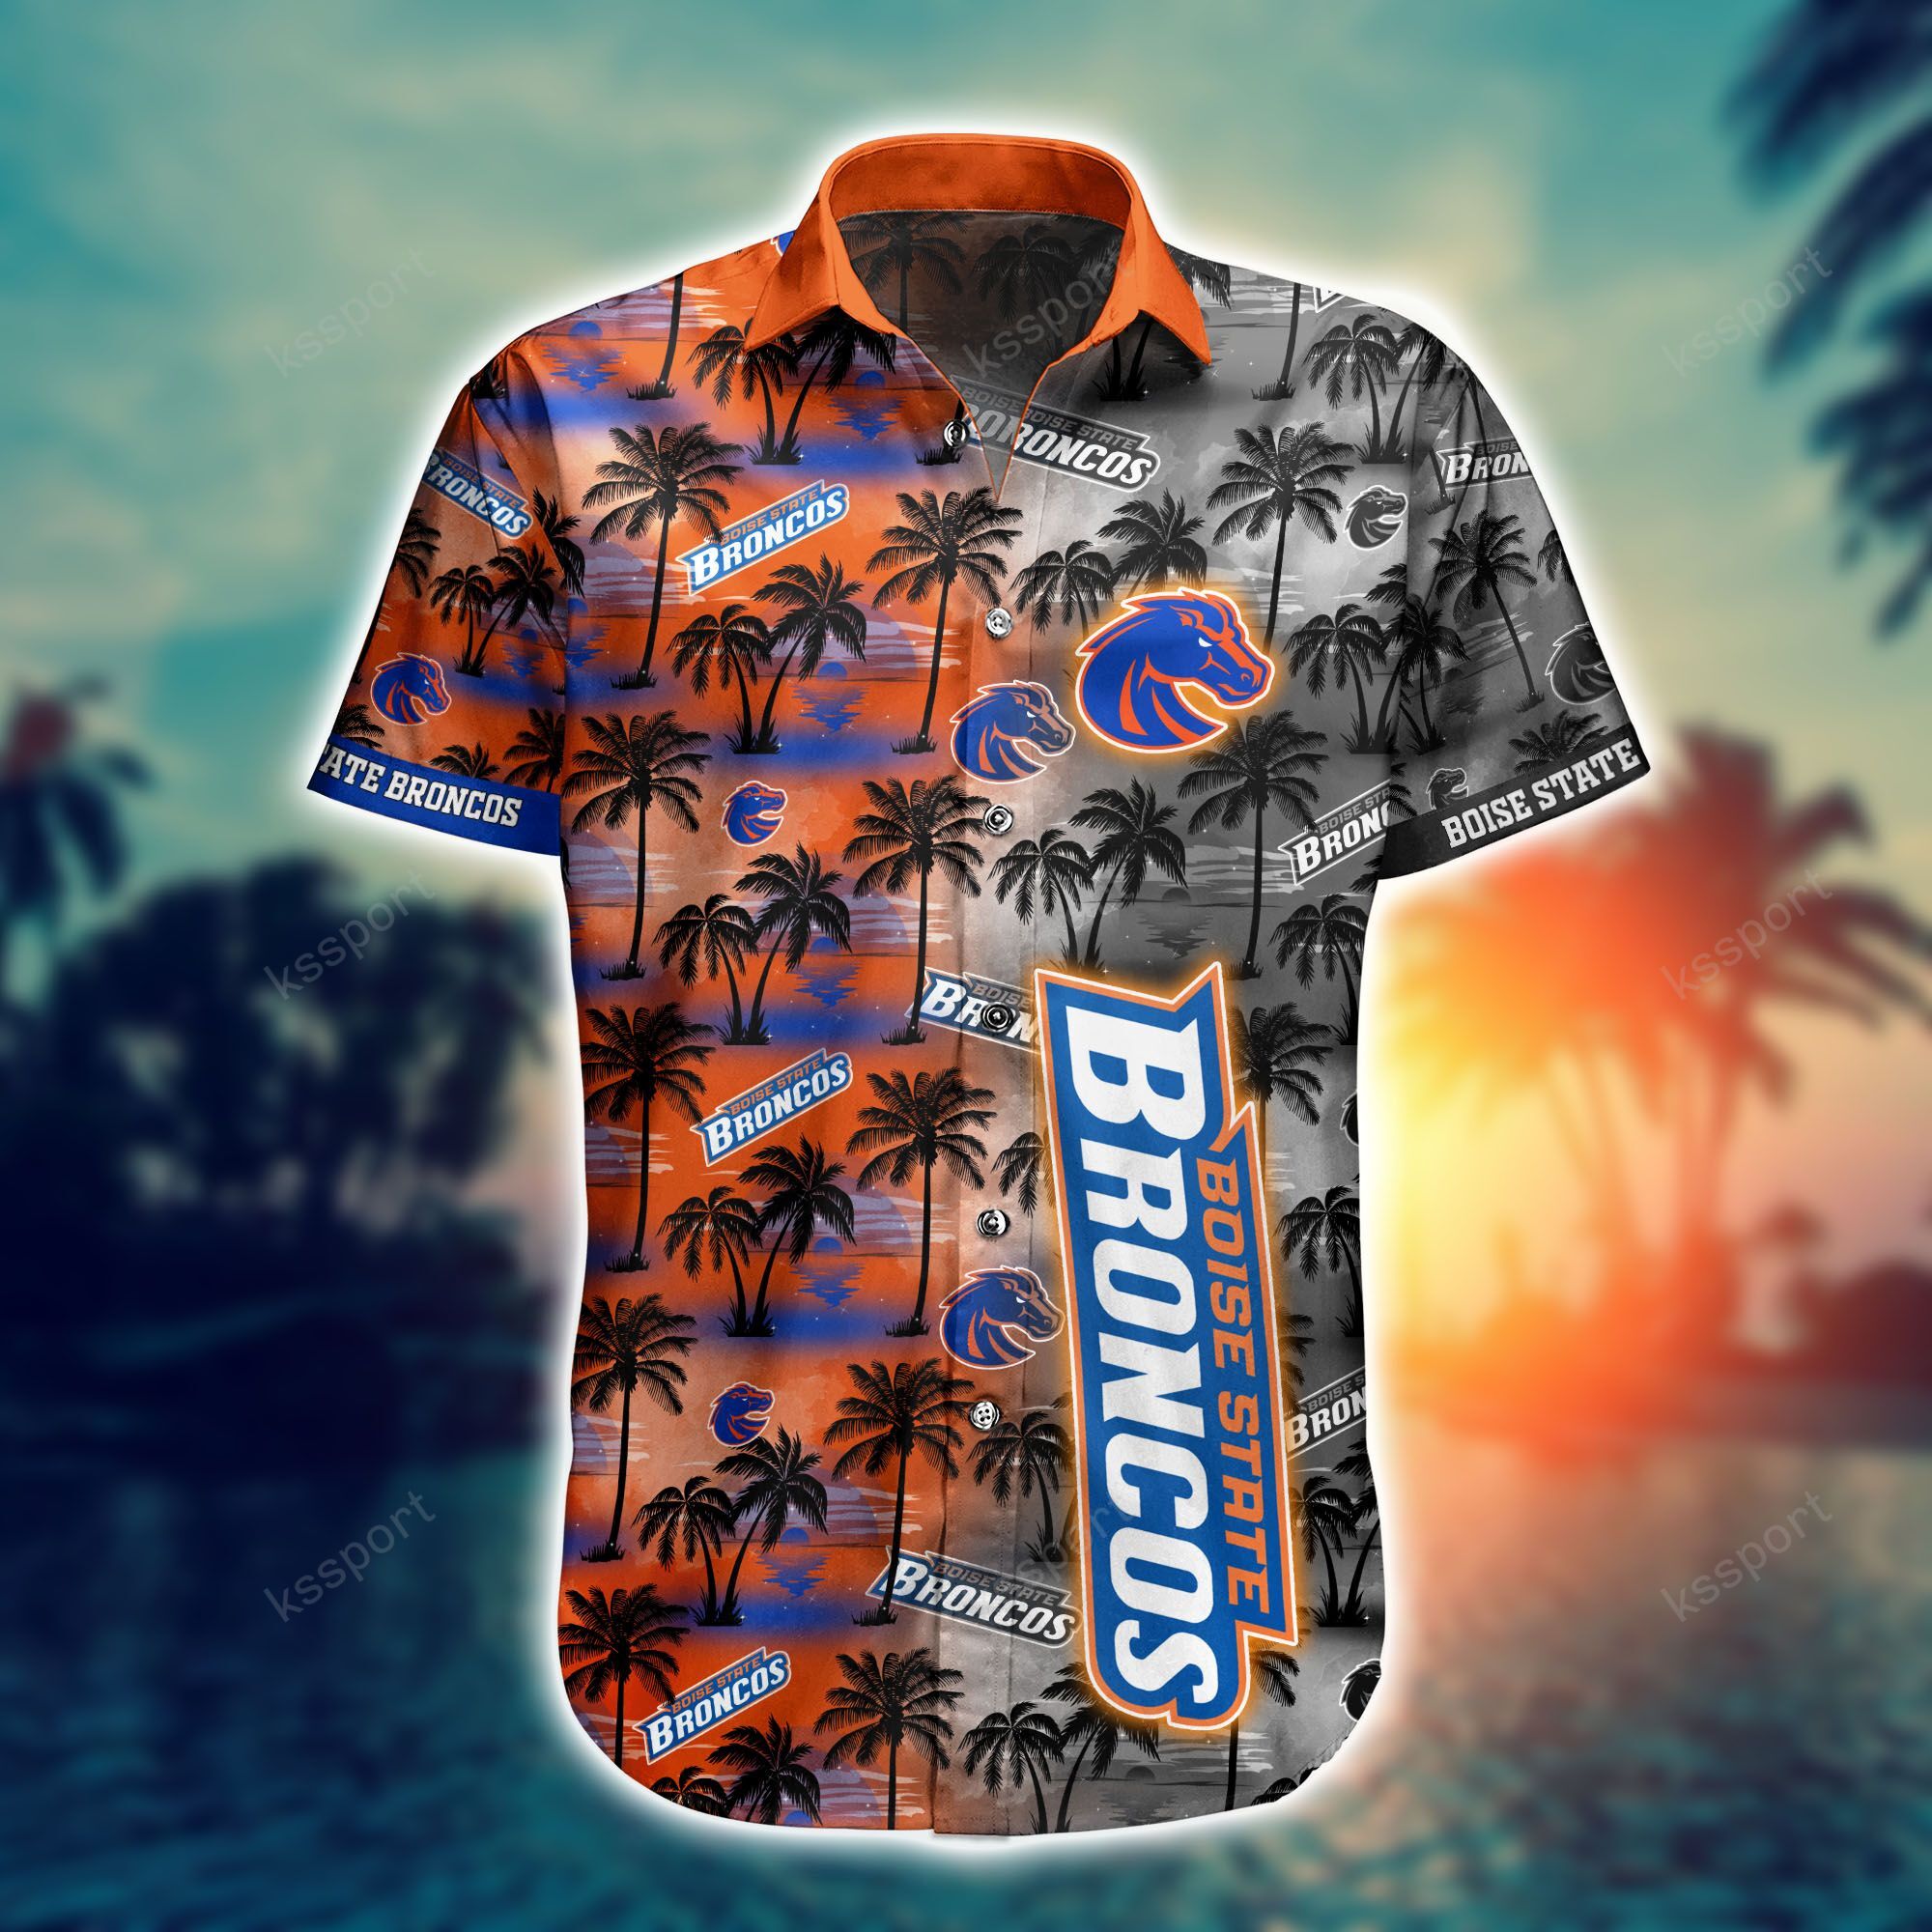 Top cool Hawaiian shirt 2022 - Make sure you get yours today before they run out! 124